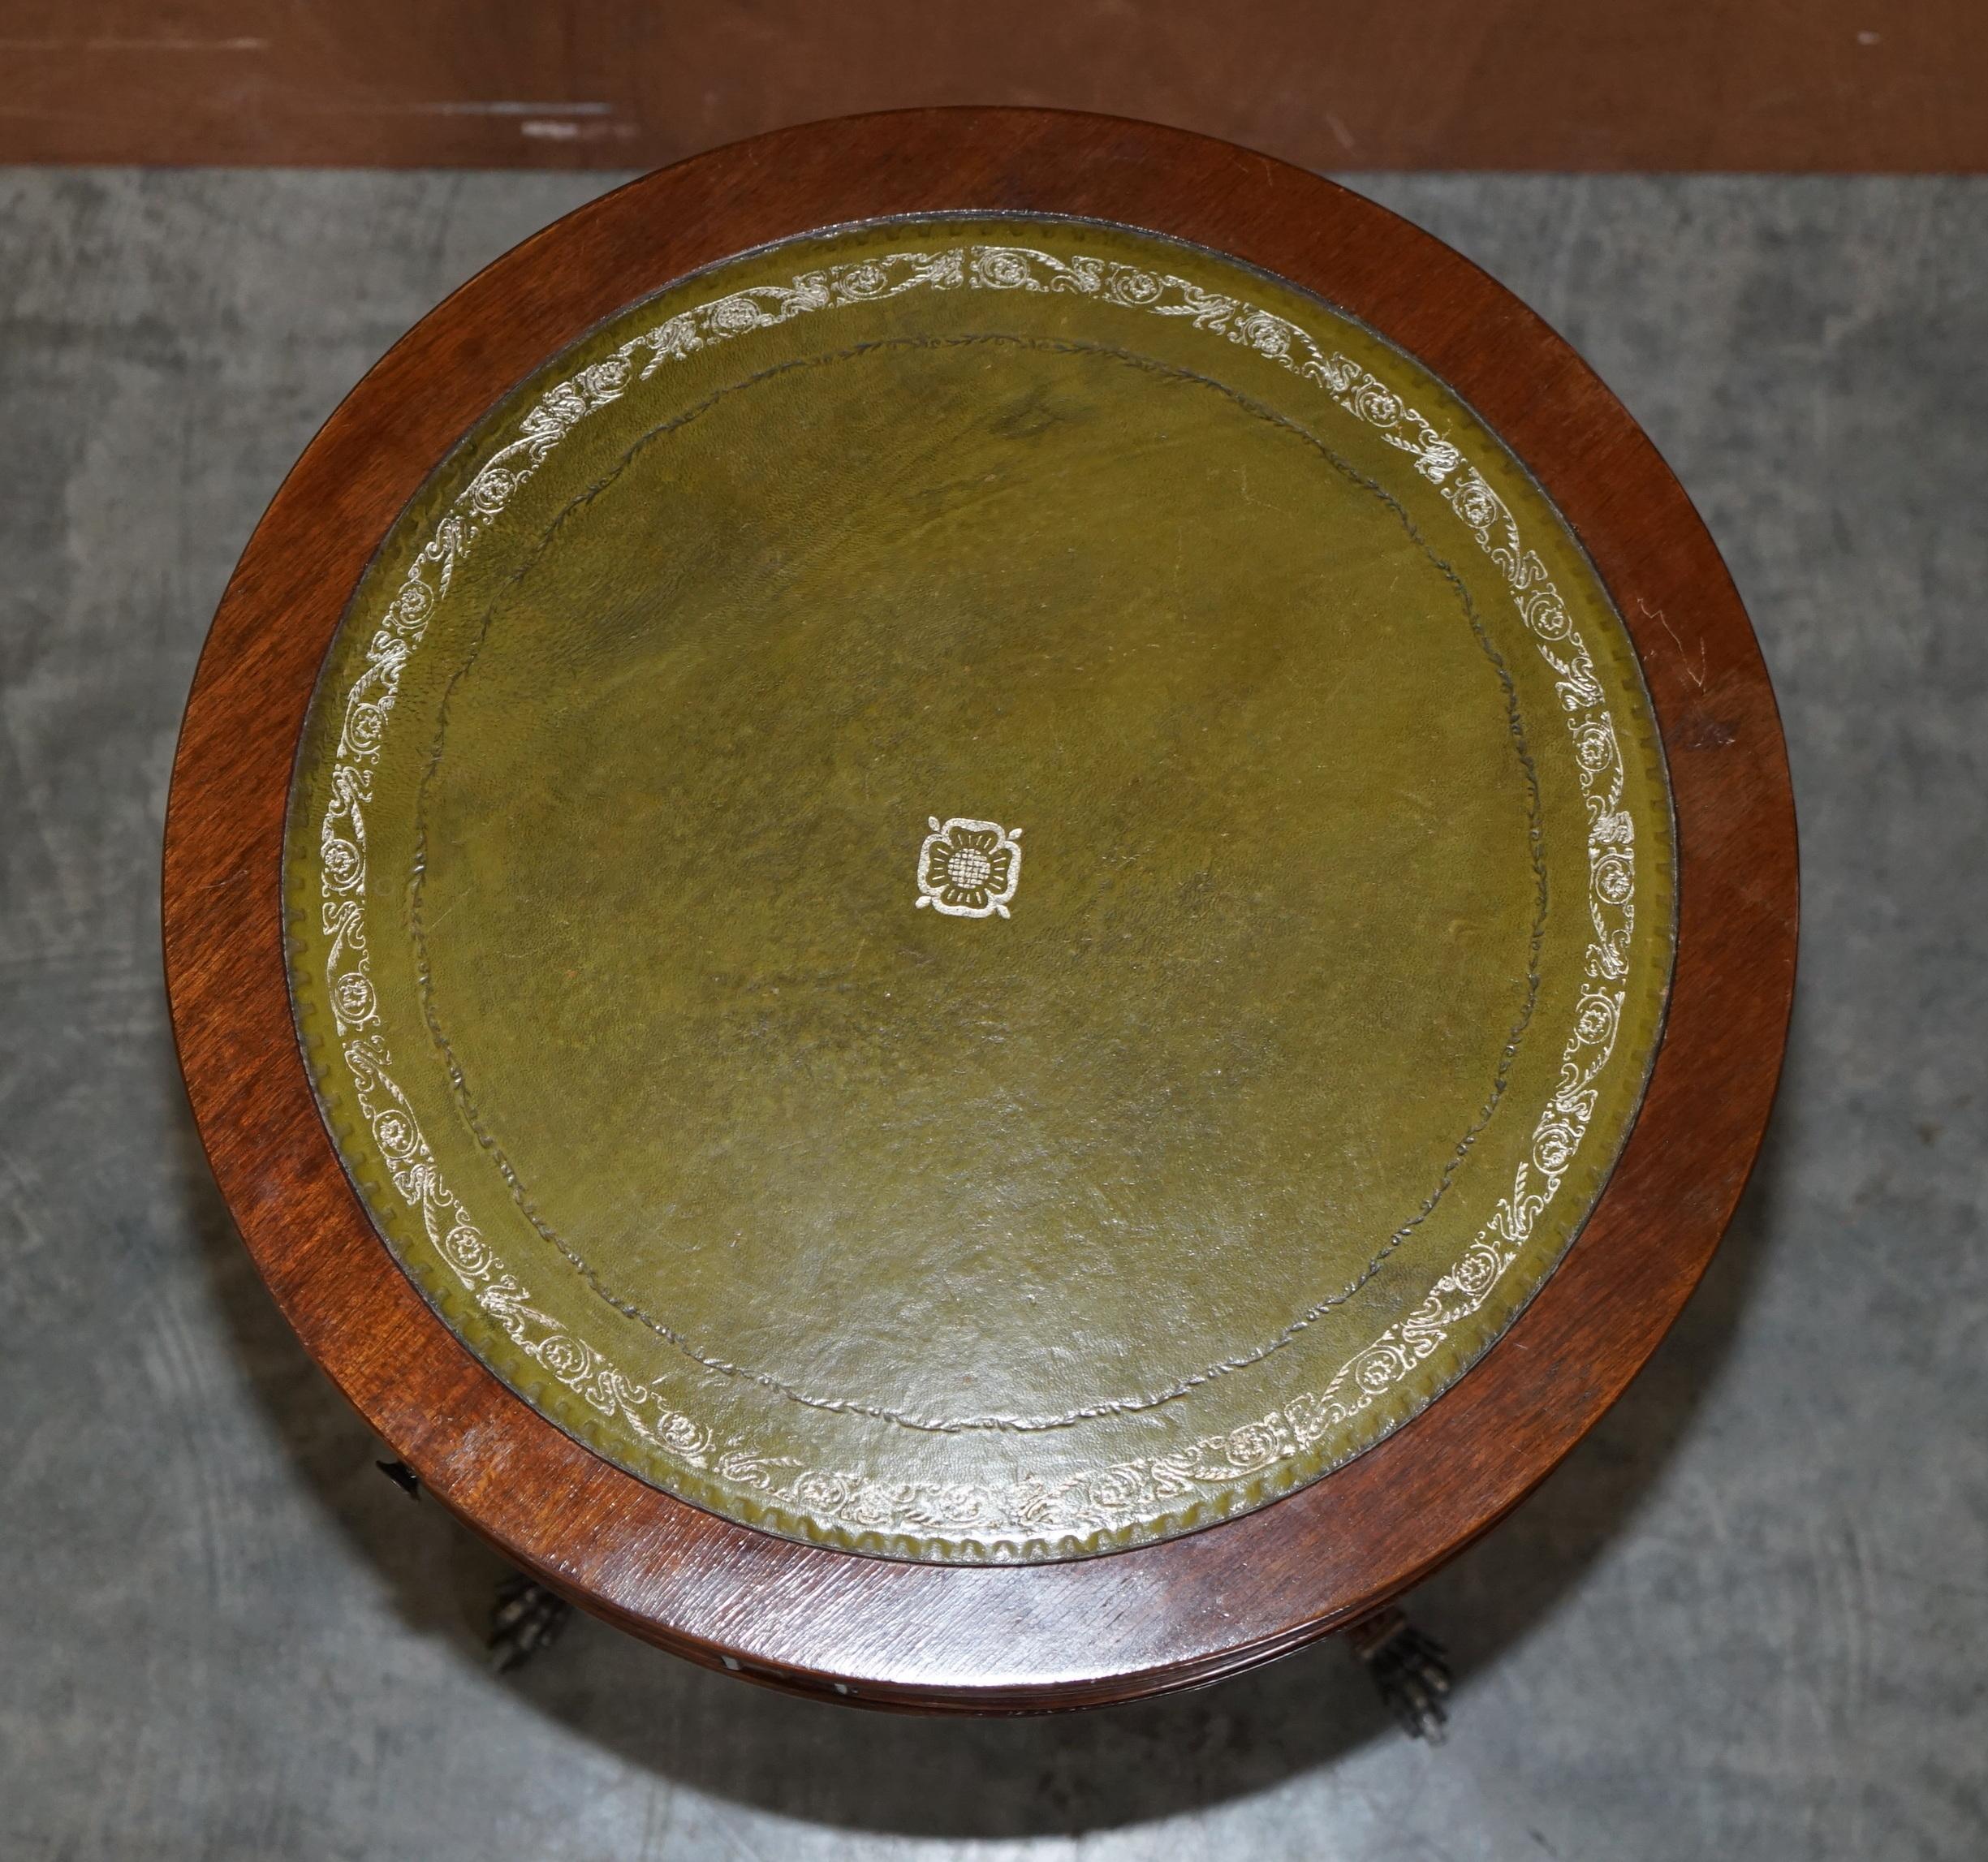 We are delighted to offer for sale this lovely Regency style mahogany drum table with green leather top and two drawers

A good-looking piece, the leather top has nicely aged, it has gold leaf embossing

We have deep cleaned hand condition waxed